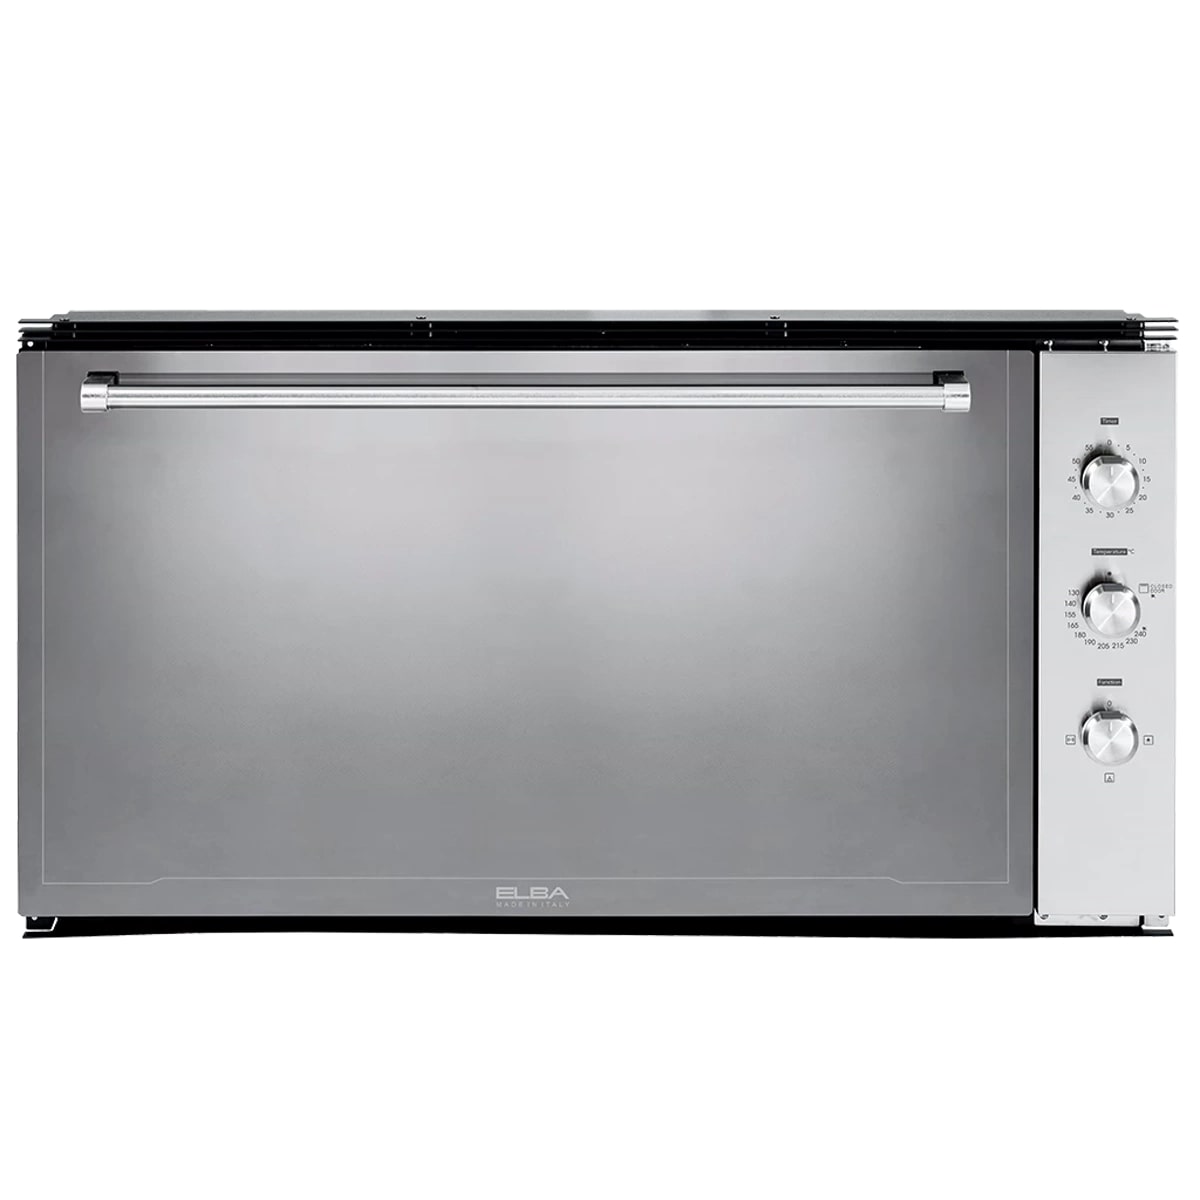 Elba Gas Oven Built-in 90 cm stainless steel With 2 Fans